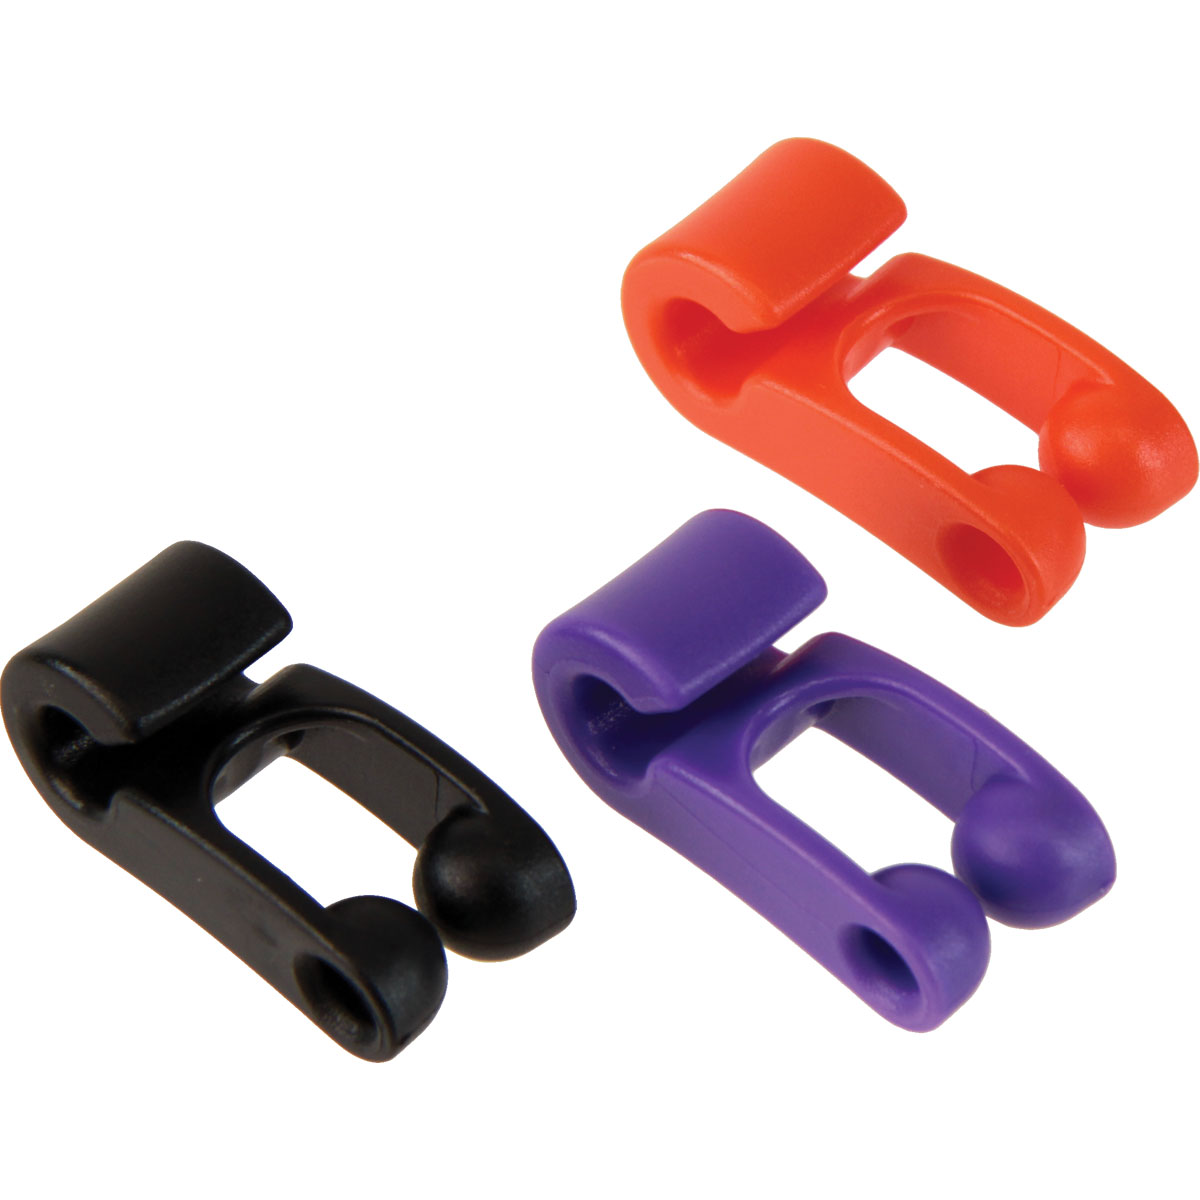 LANYARD CLIPS, 3 PACK ASSORTED